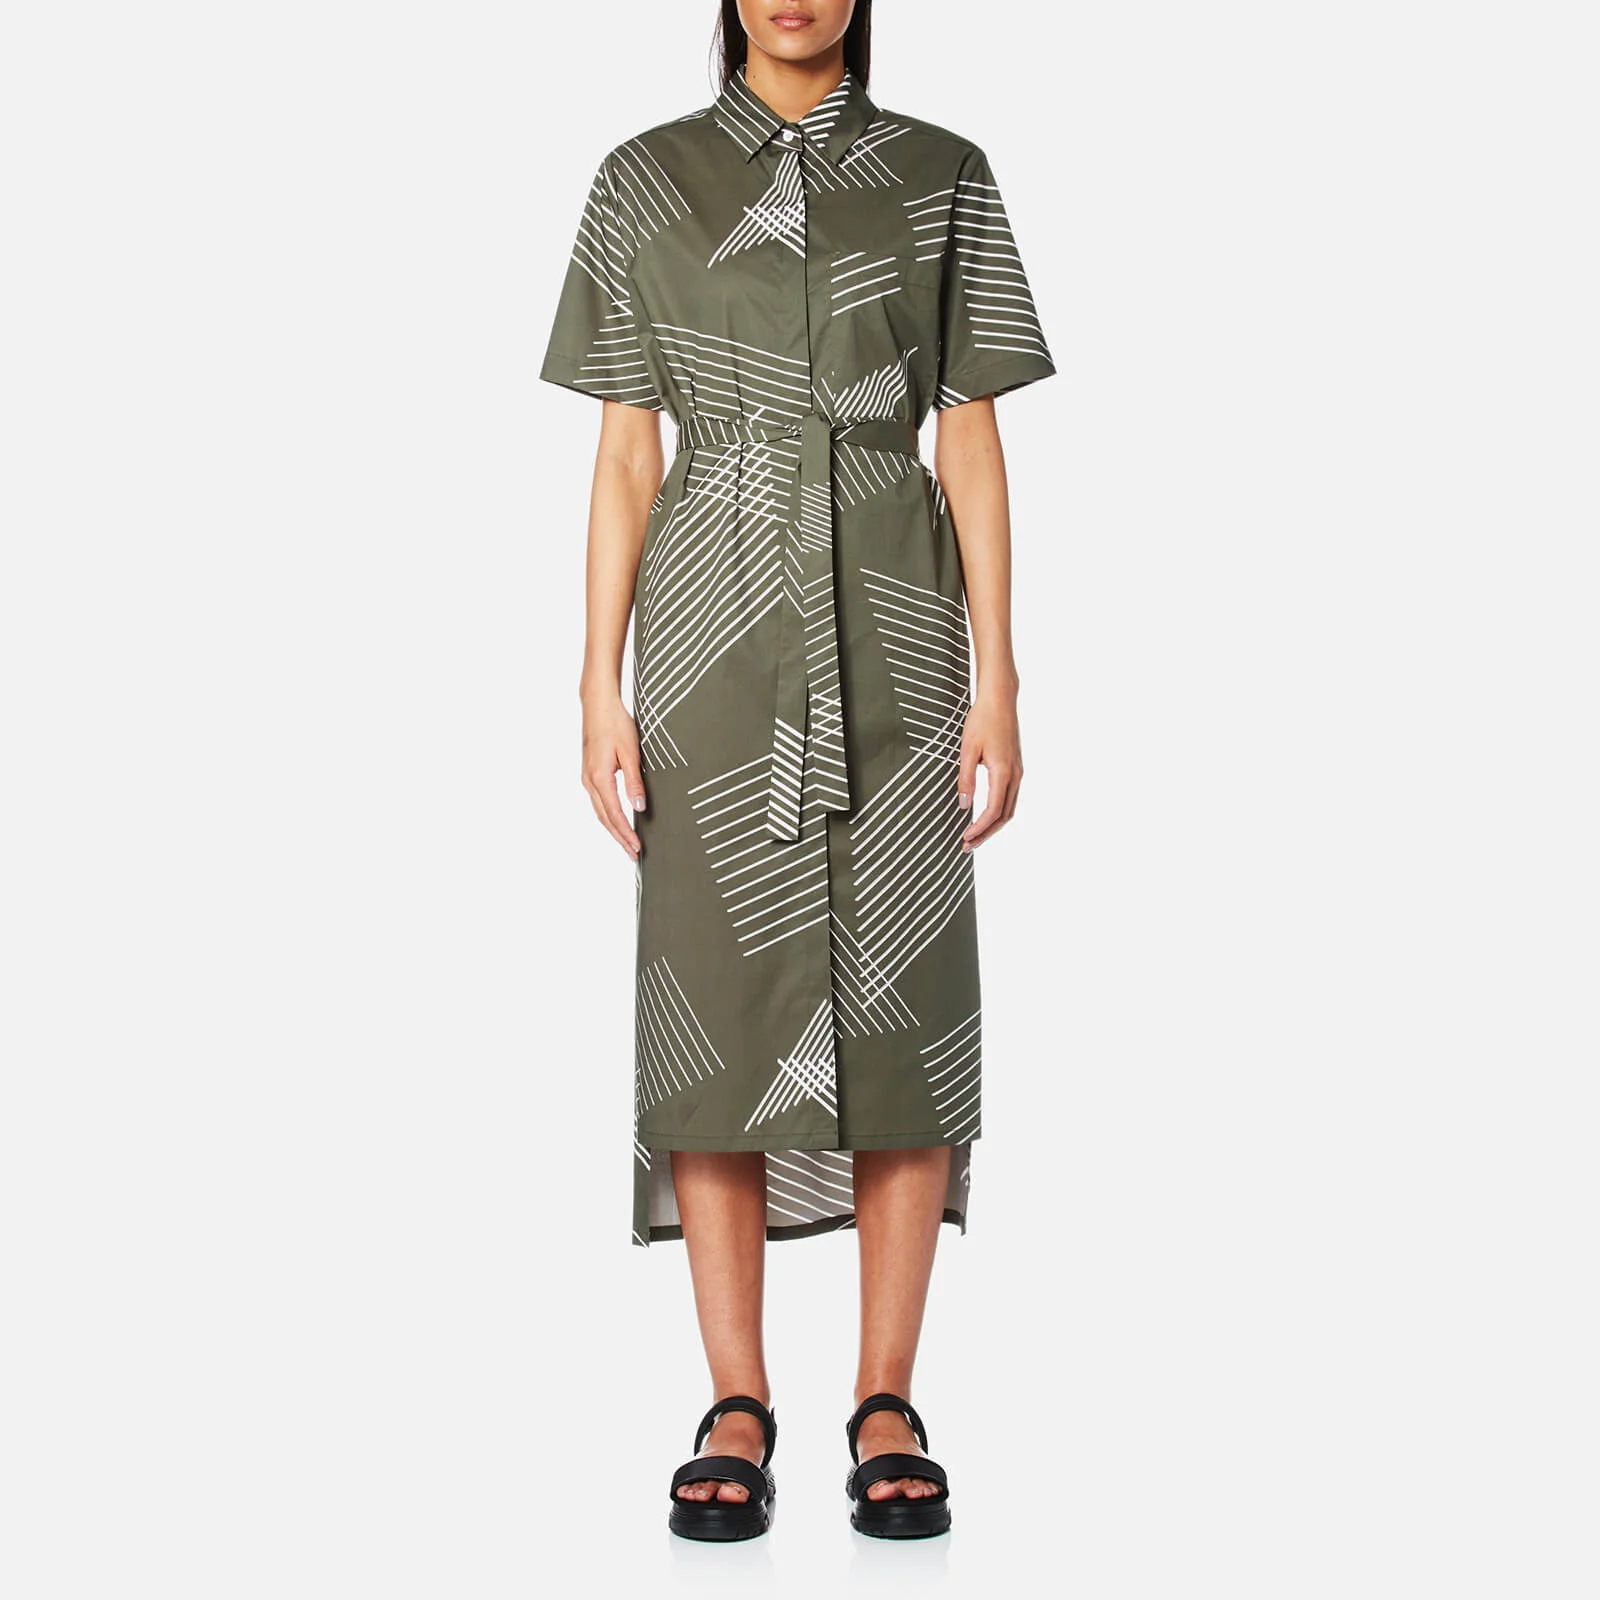 DKNY Women's Short Sleeve Button Through Dress with Self Belt and Step Hem - Military Image 1